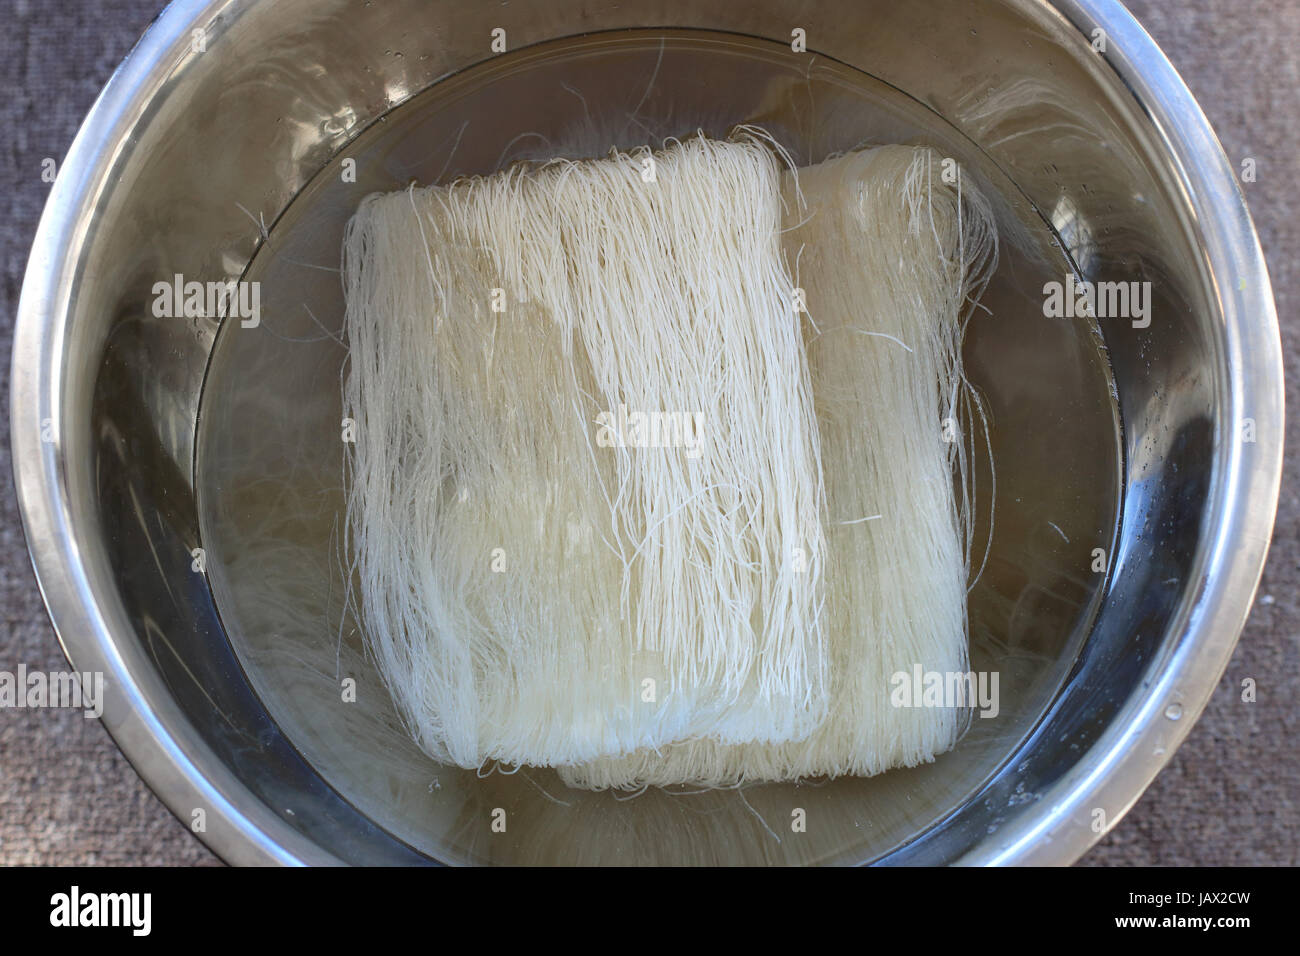 Soaking Vermicelli noodles in water Stock Photo